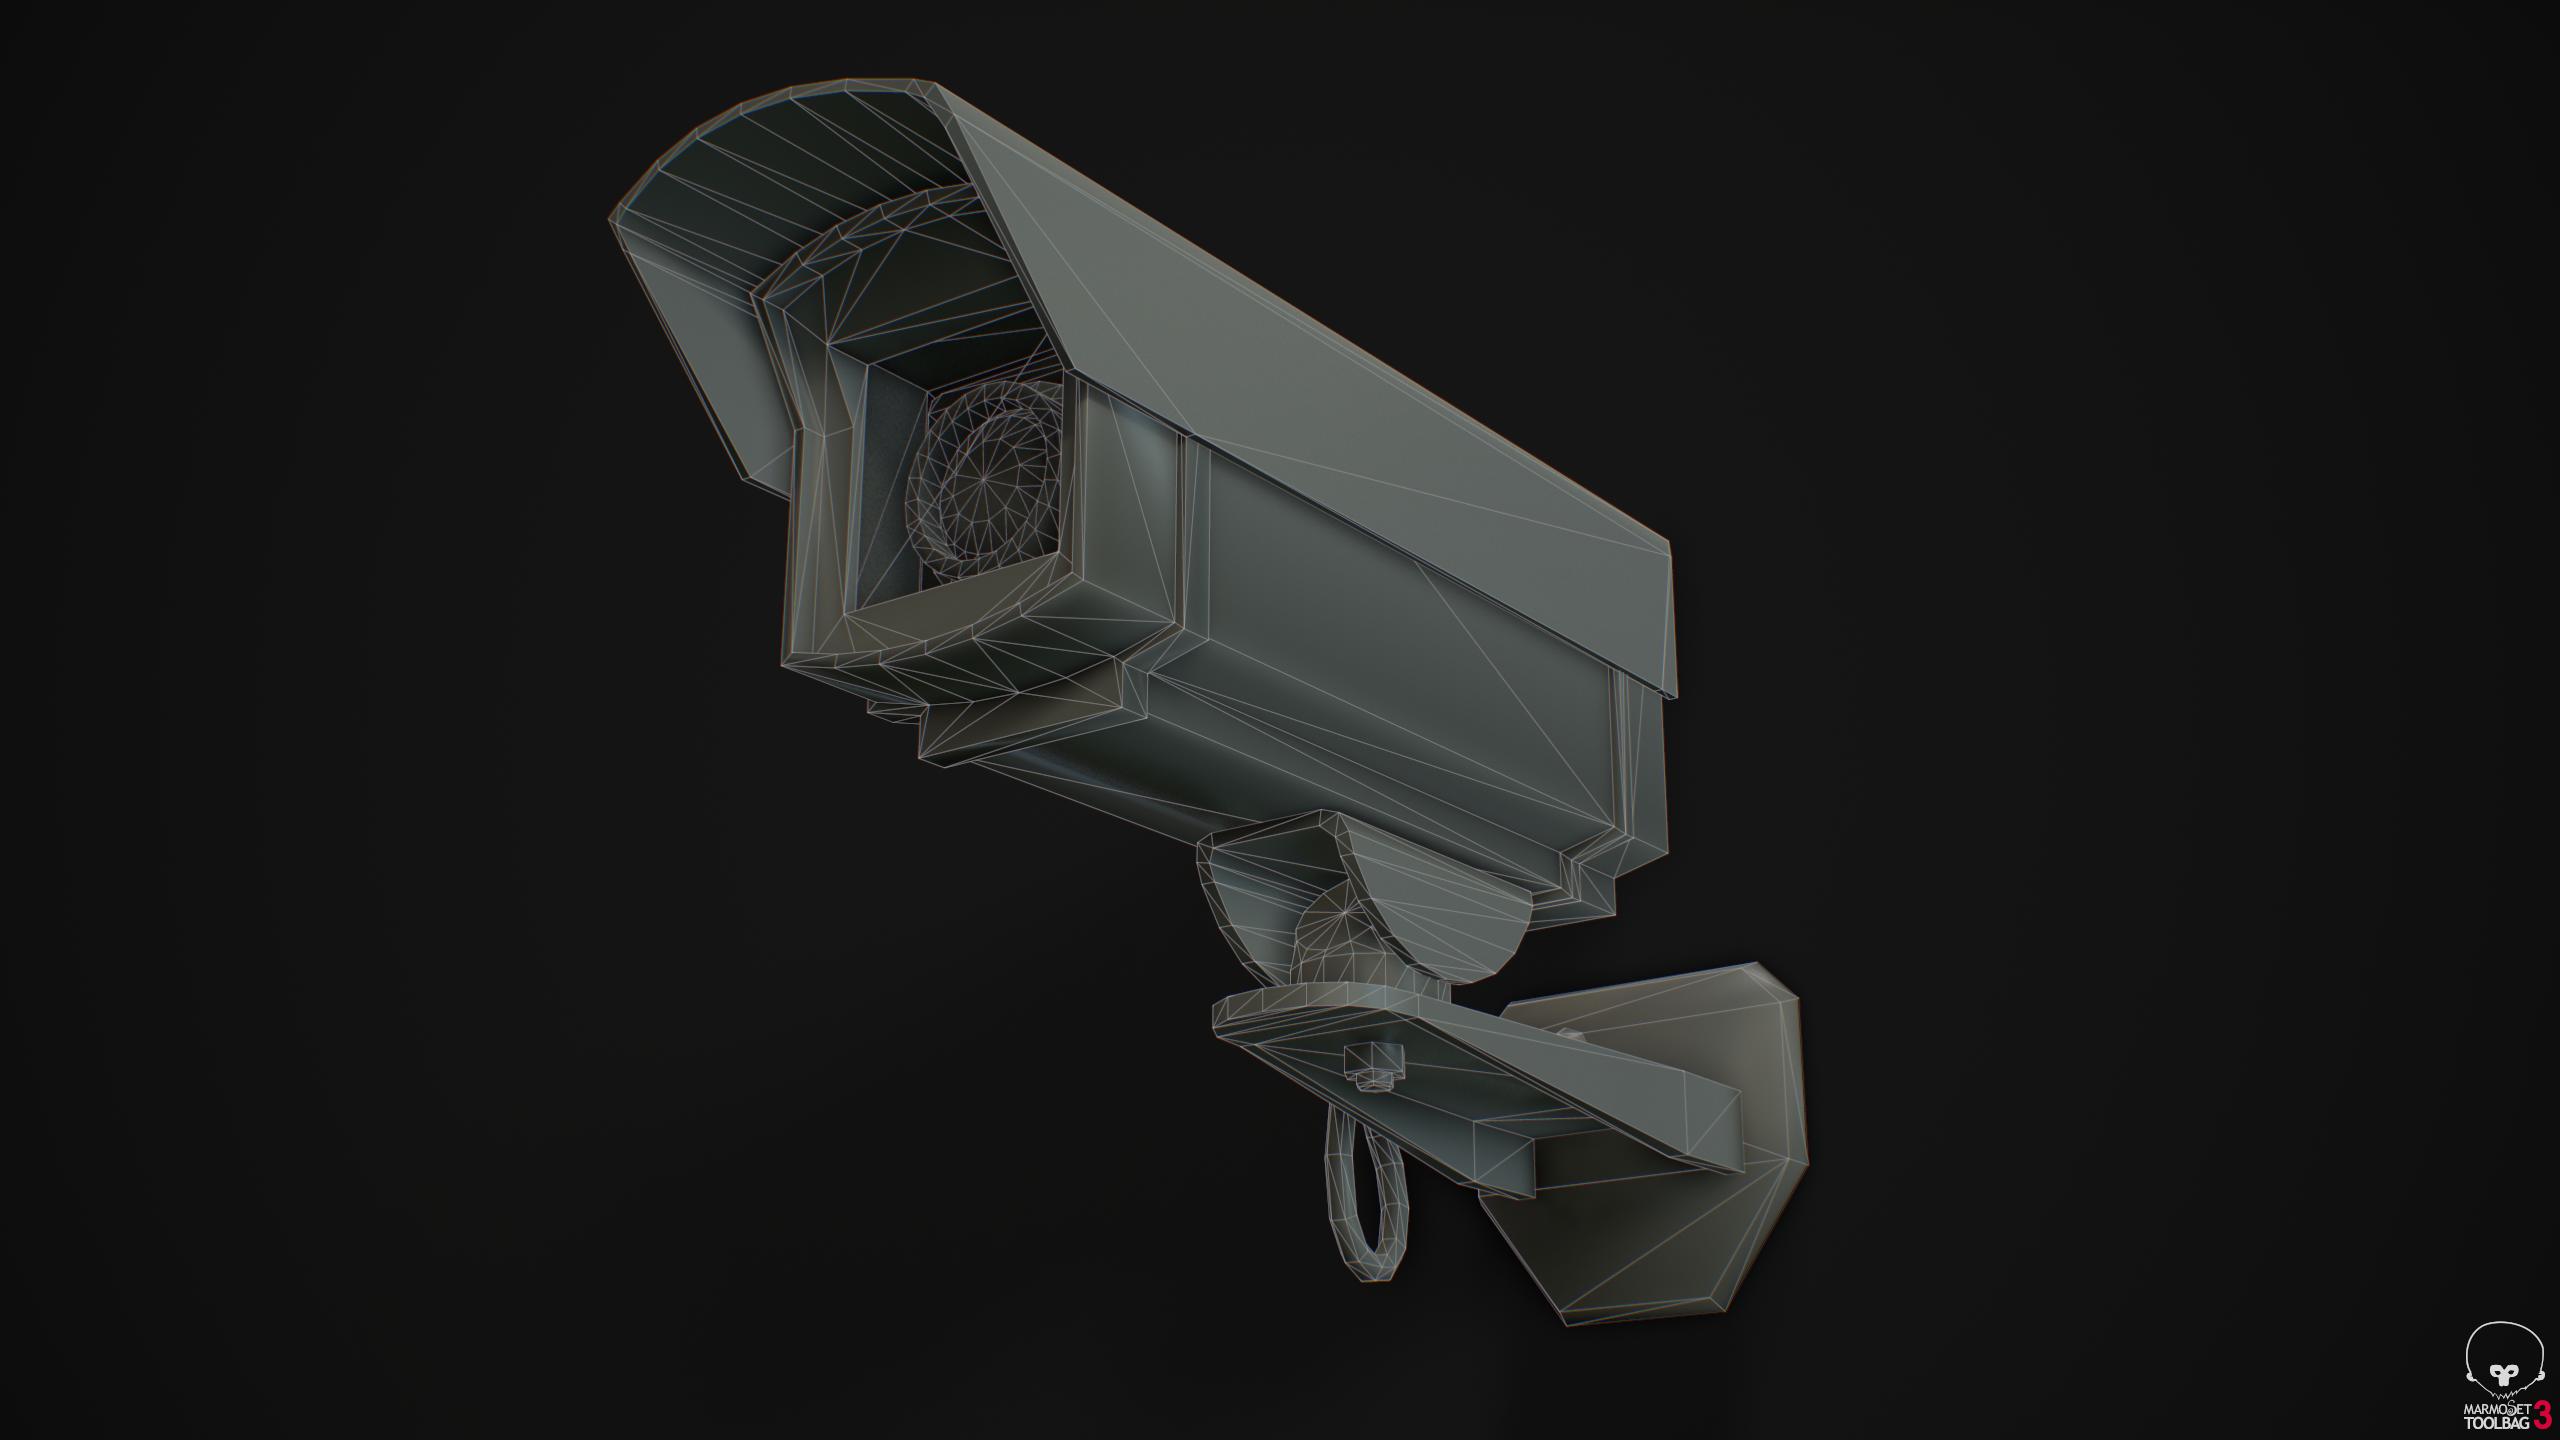 Wireframe render of a security camera